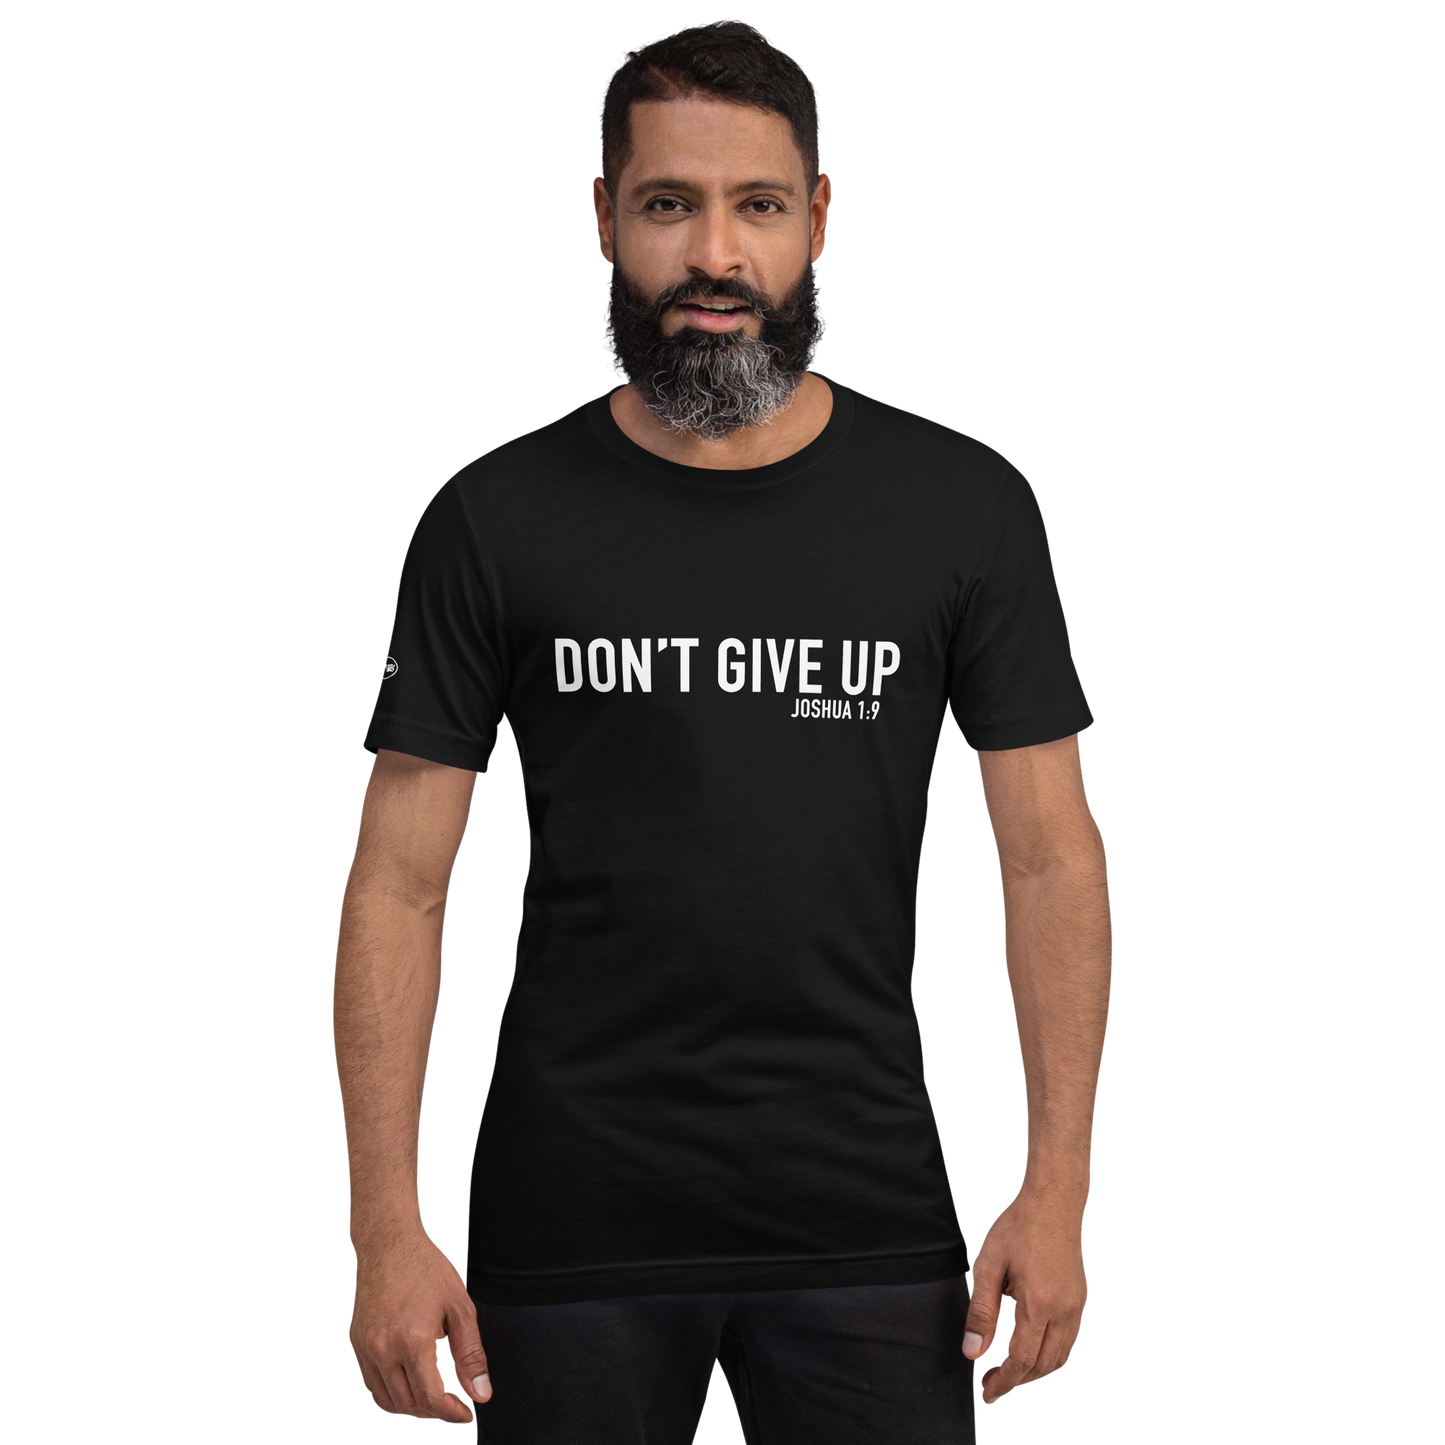 CHRISTIAN - Don't Give Up - Joshua 1:9